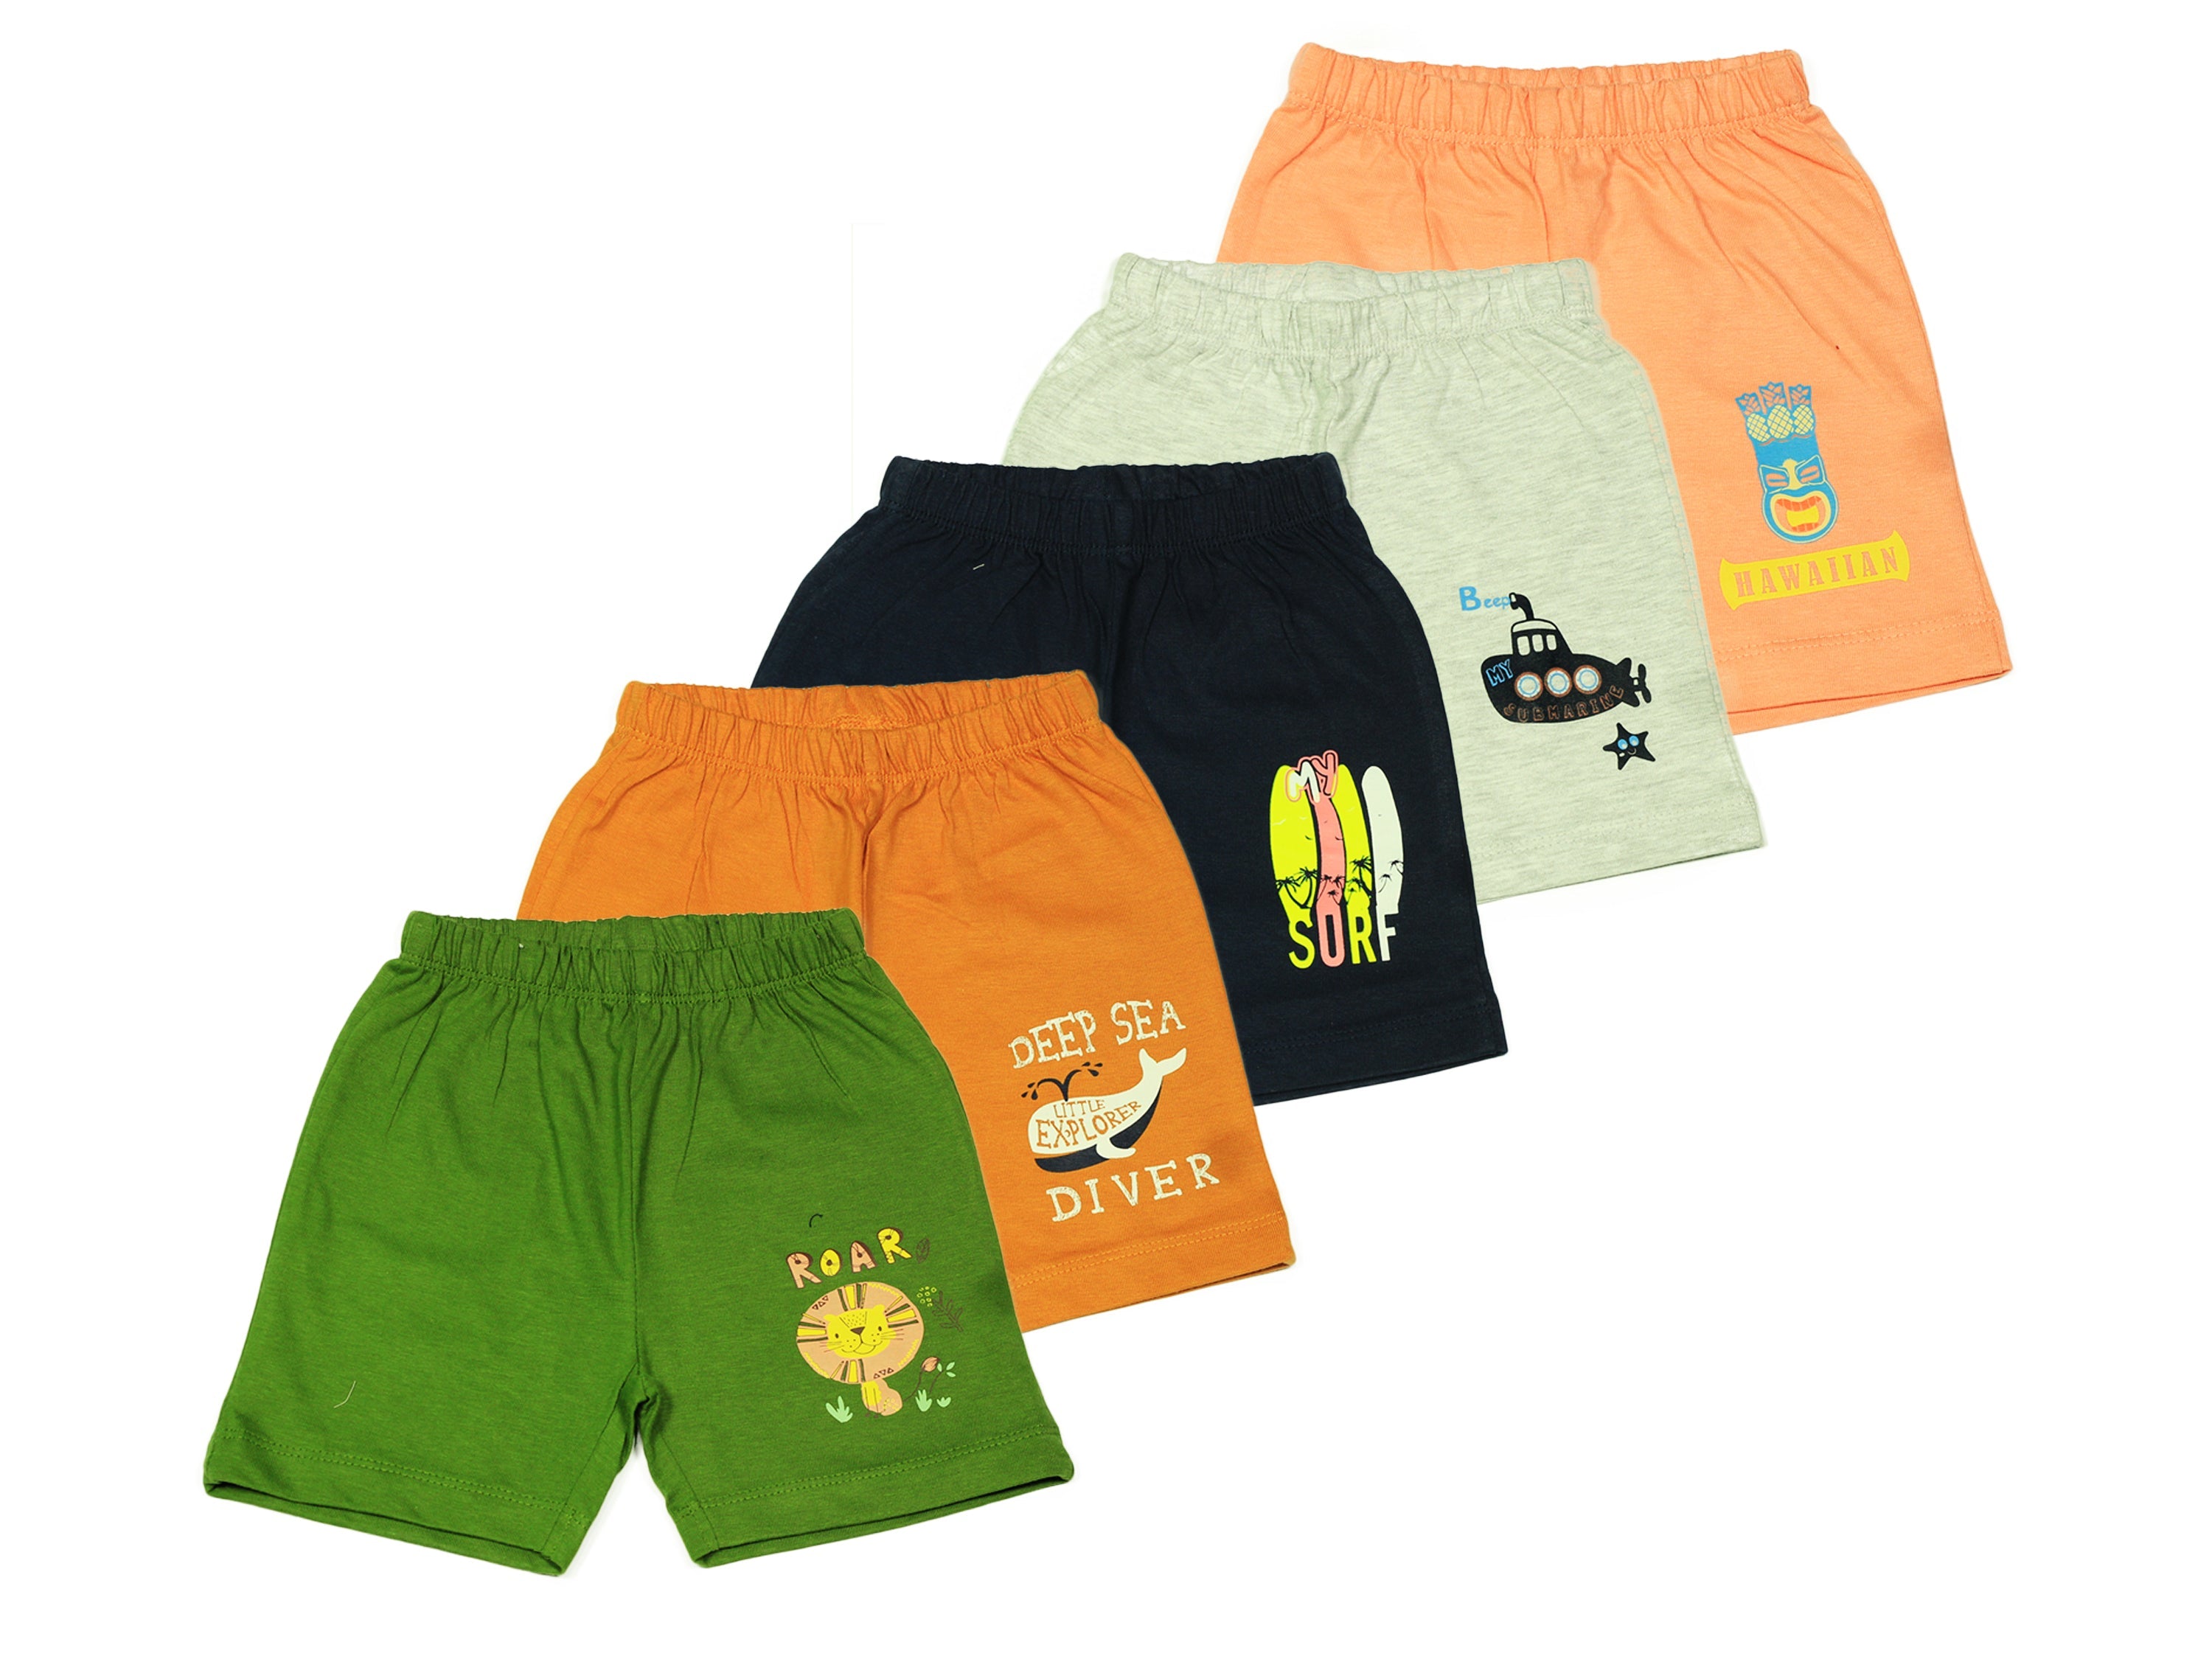 Boys Multicolor Cotton Shorts Pack of 5